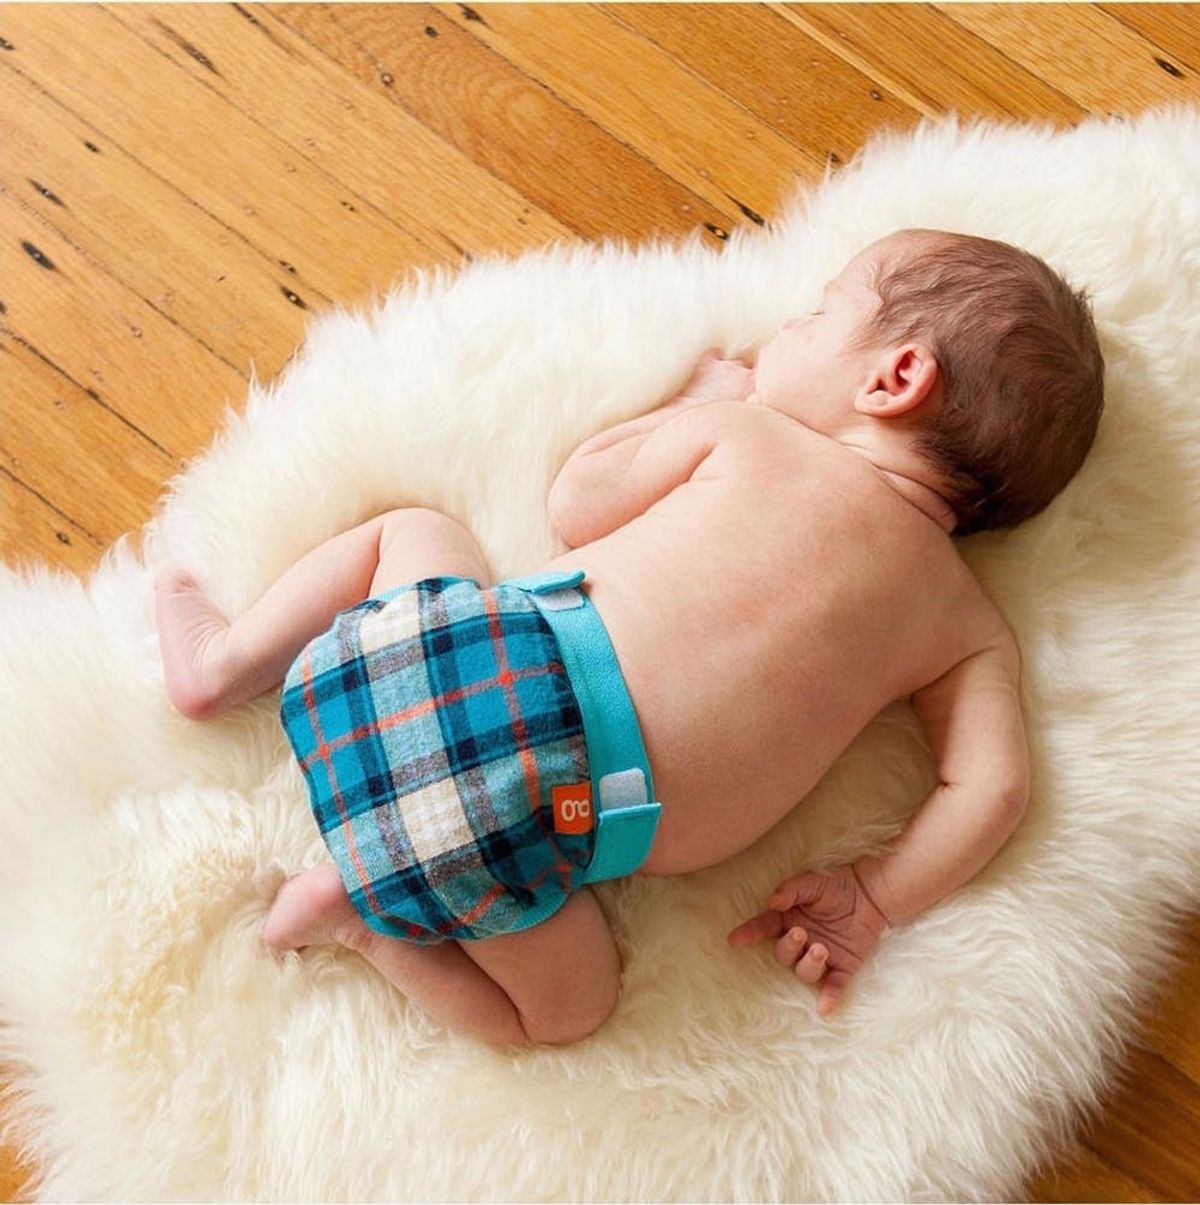 Eco-Baby! 11 Smart Organic Gifts for a New Baby